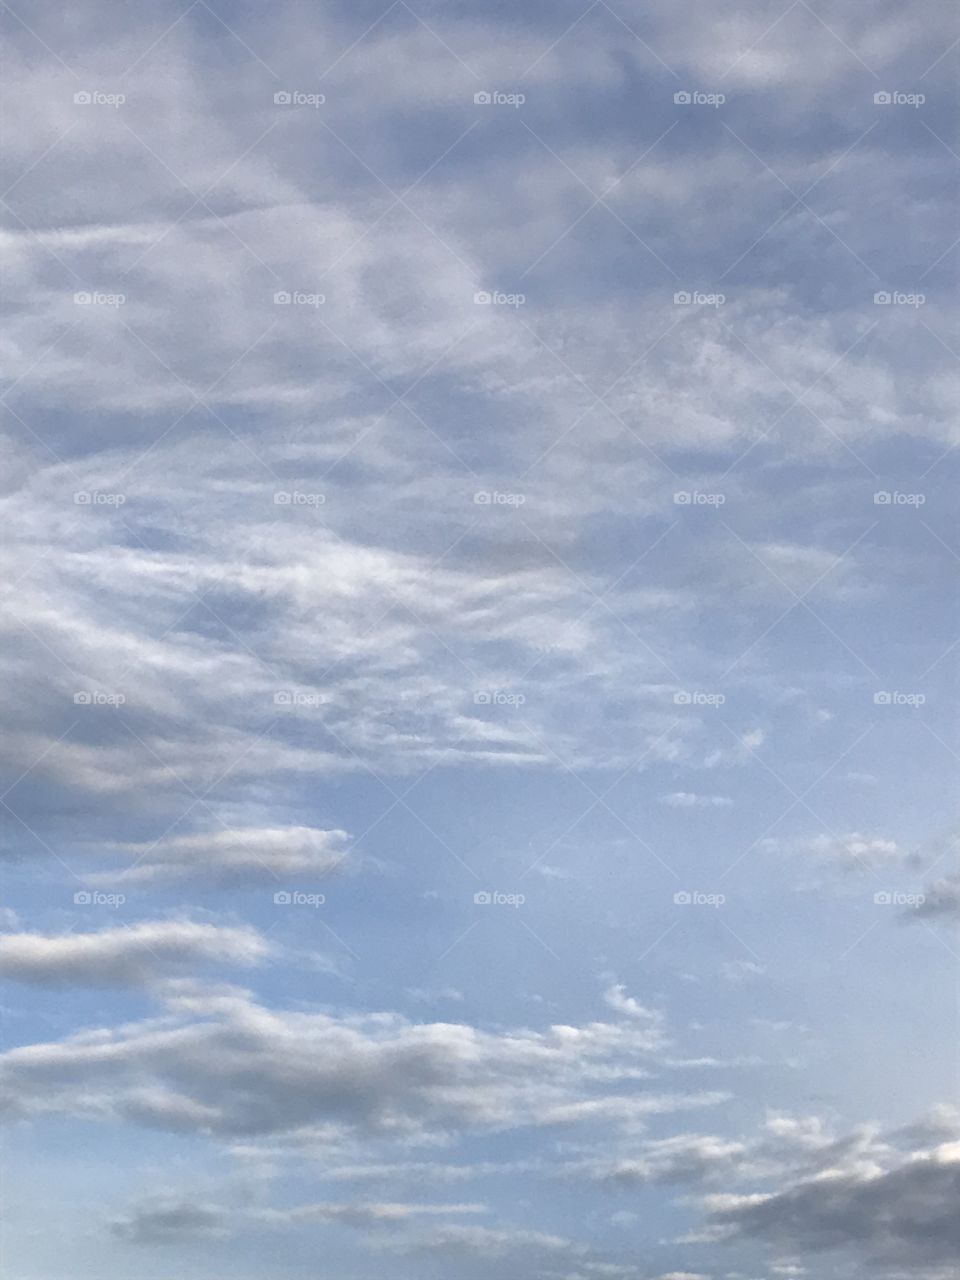 Seattle Clouds